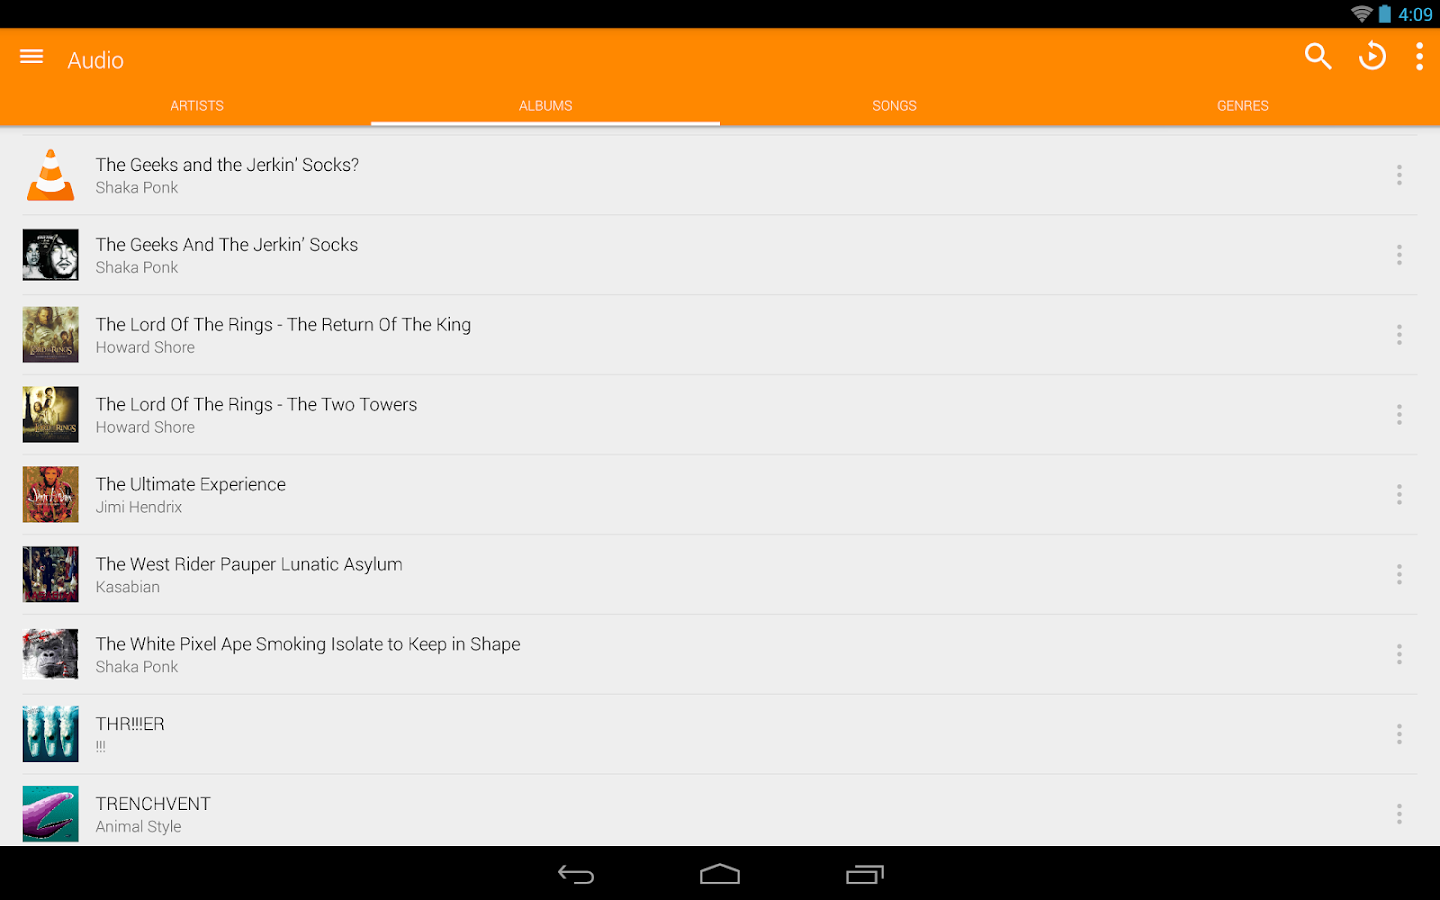 VLC for Android - screenshot